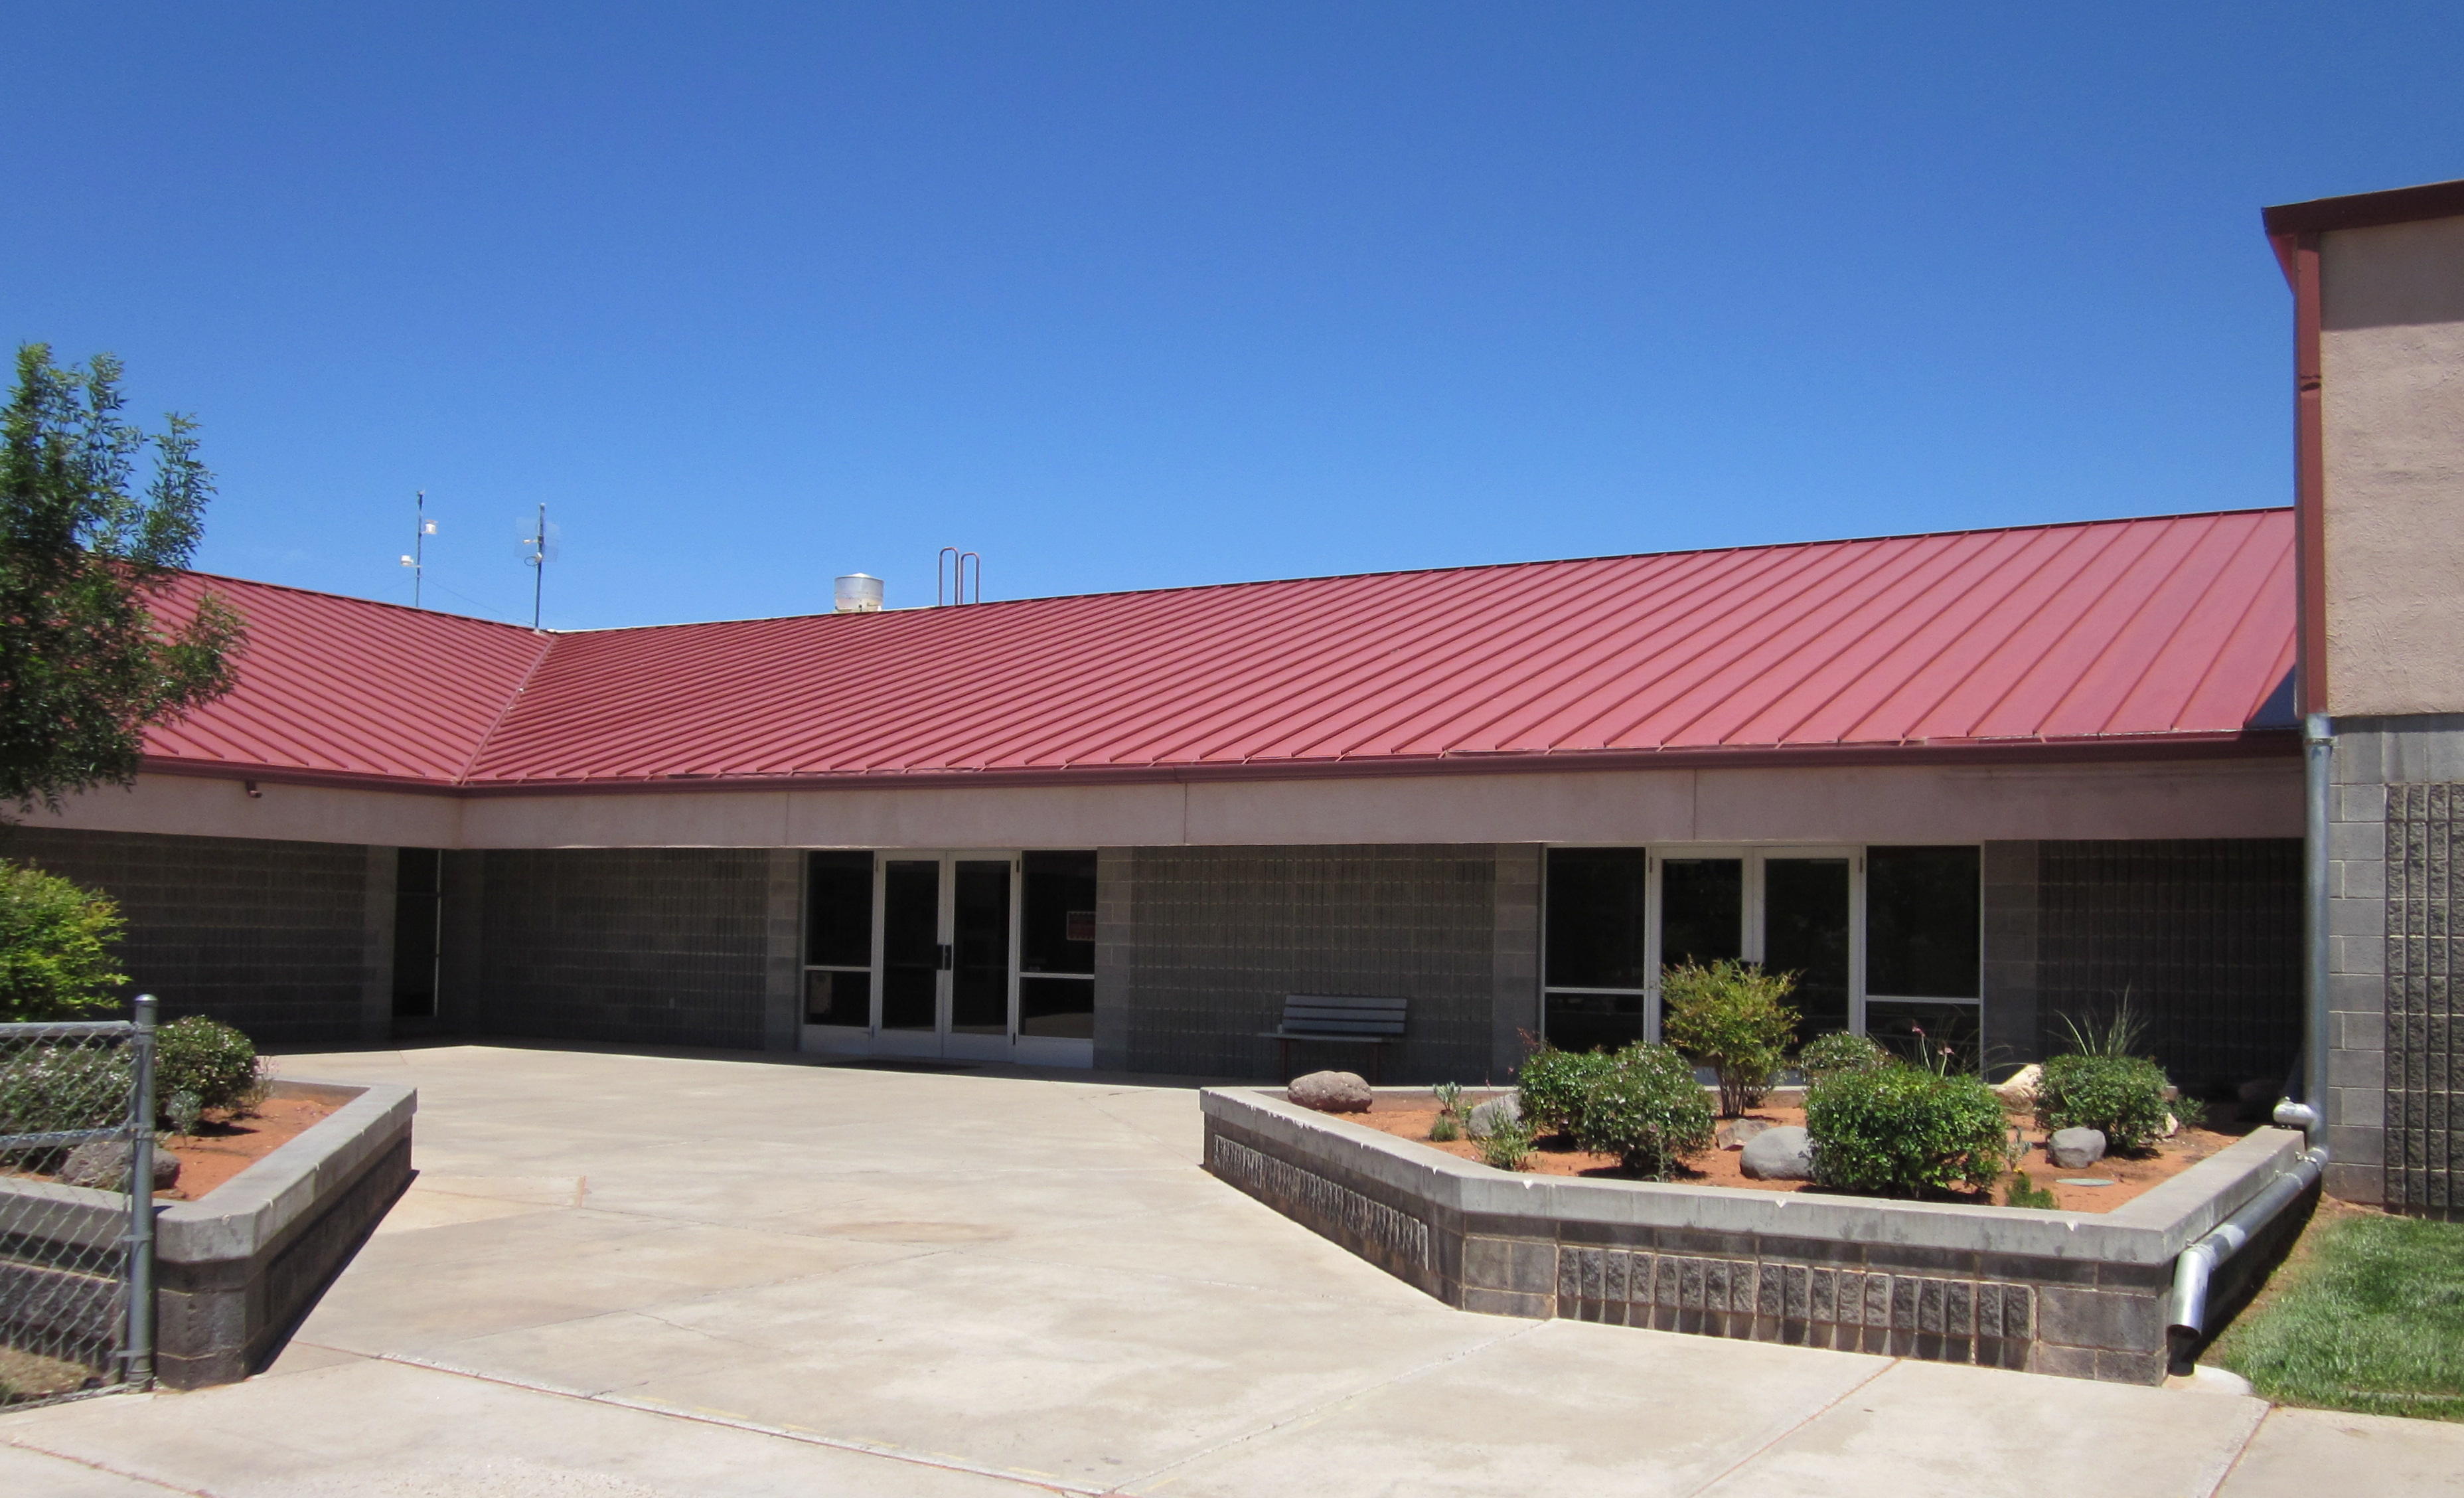 Main entrance at the Sunset Elementary School